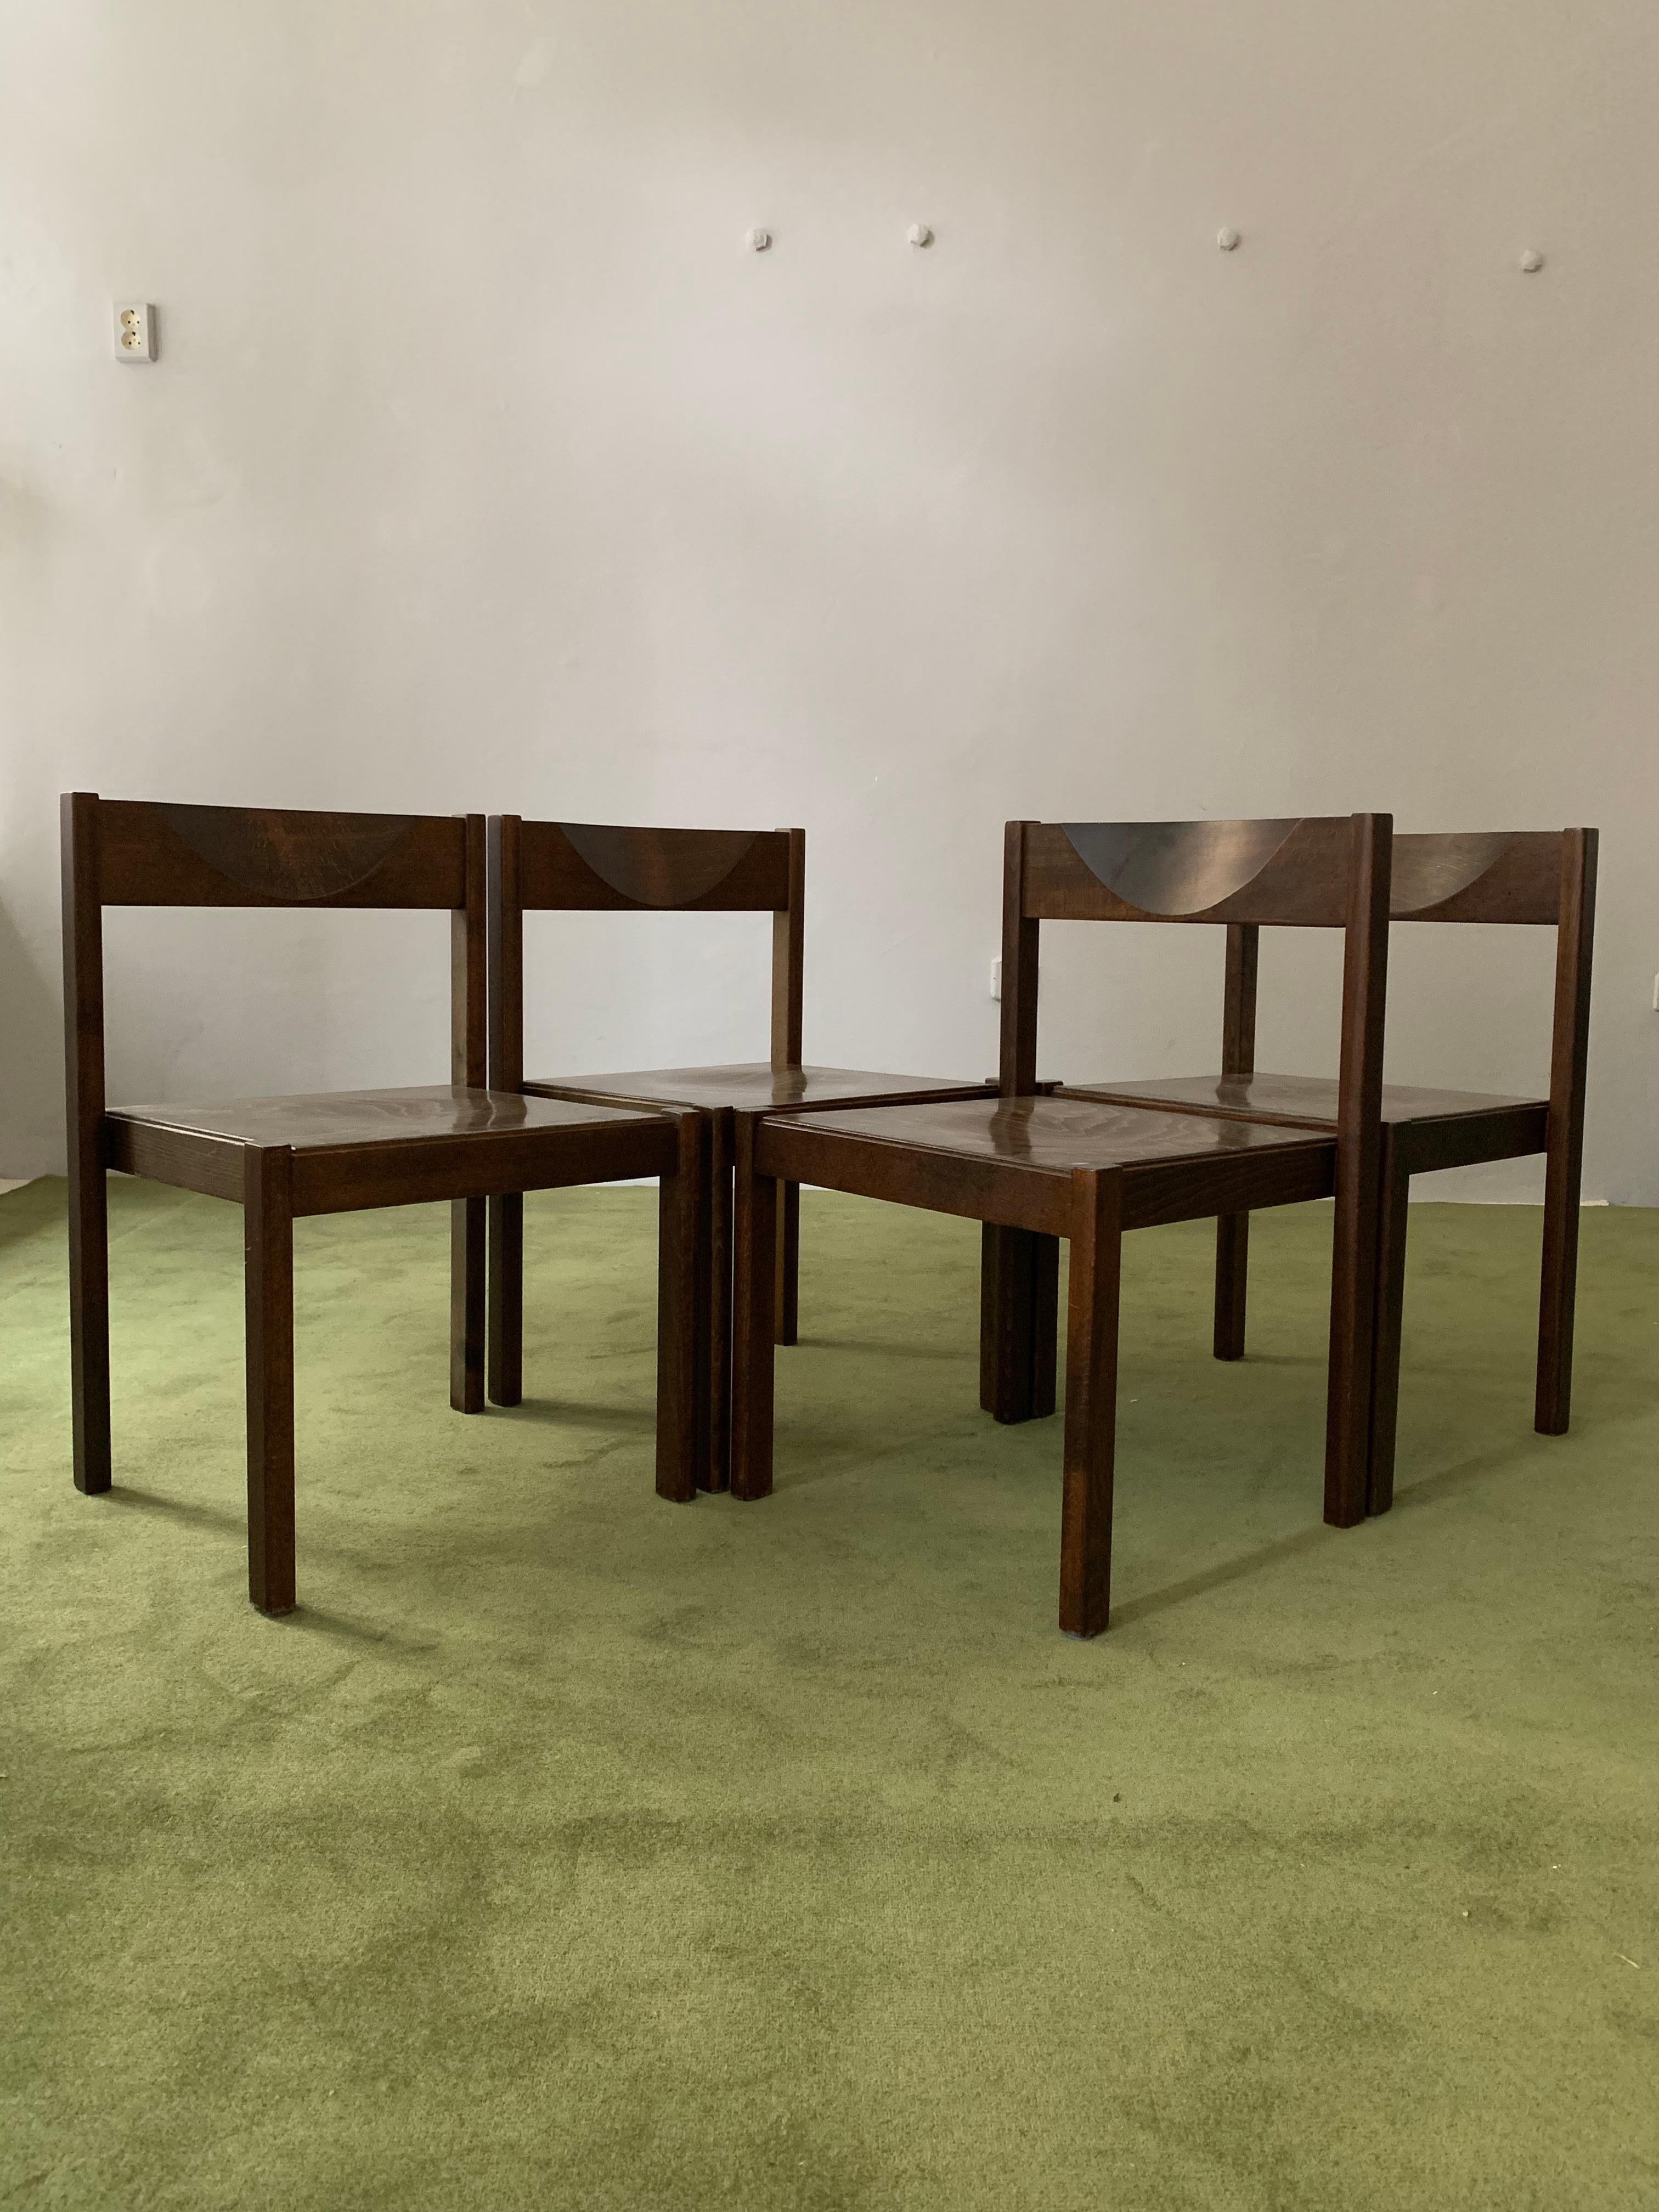  Set of 4 Santo Chairs by Edlef Bandixen for Dietiker Switzerland 1969  For Sale 6